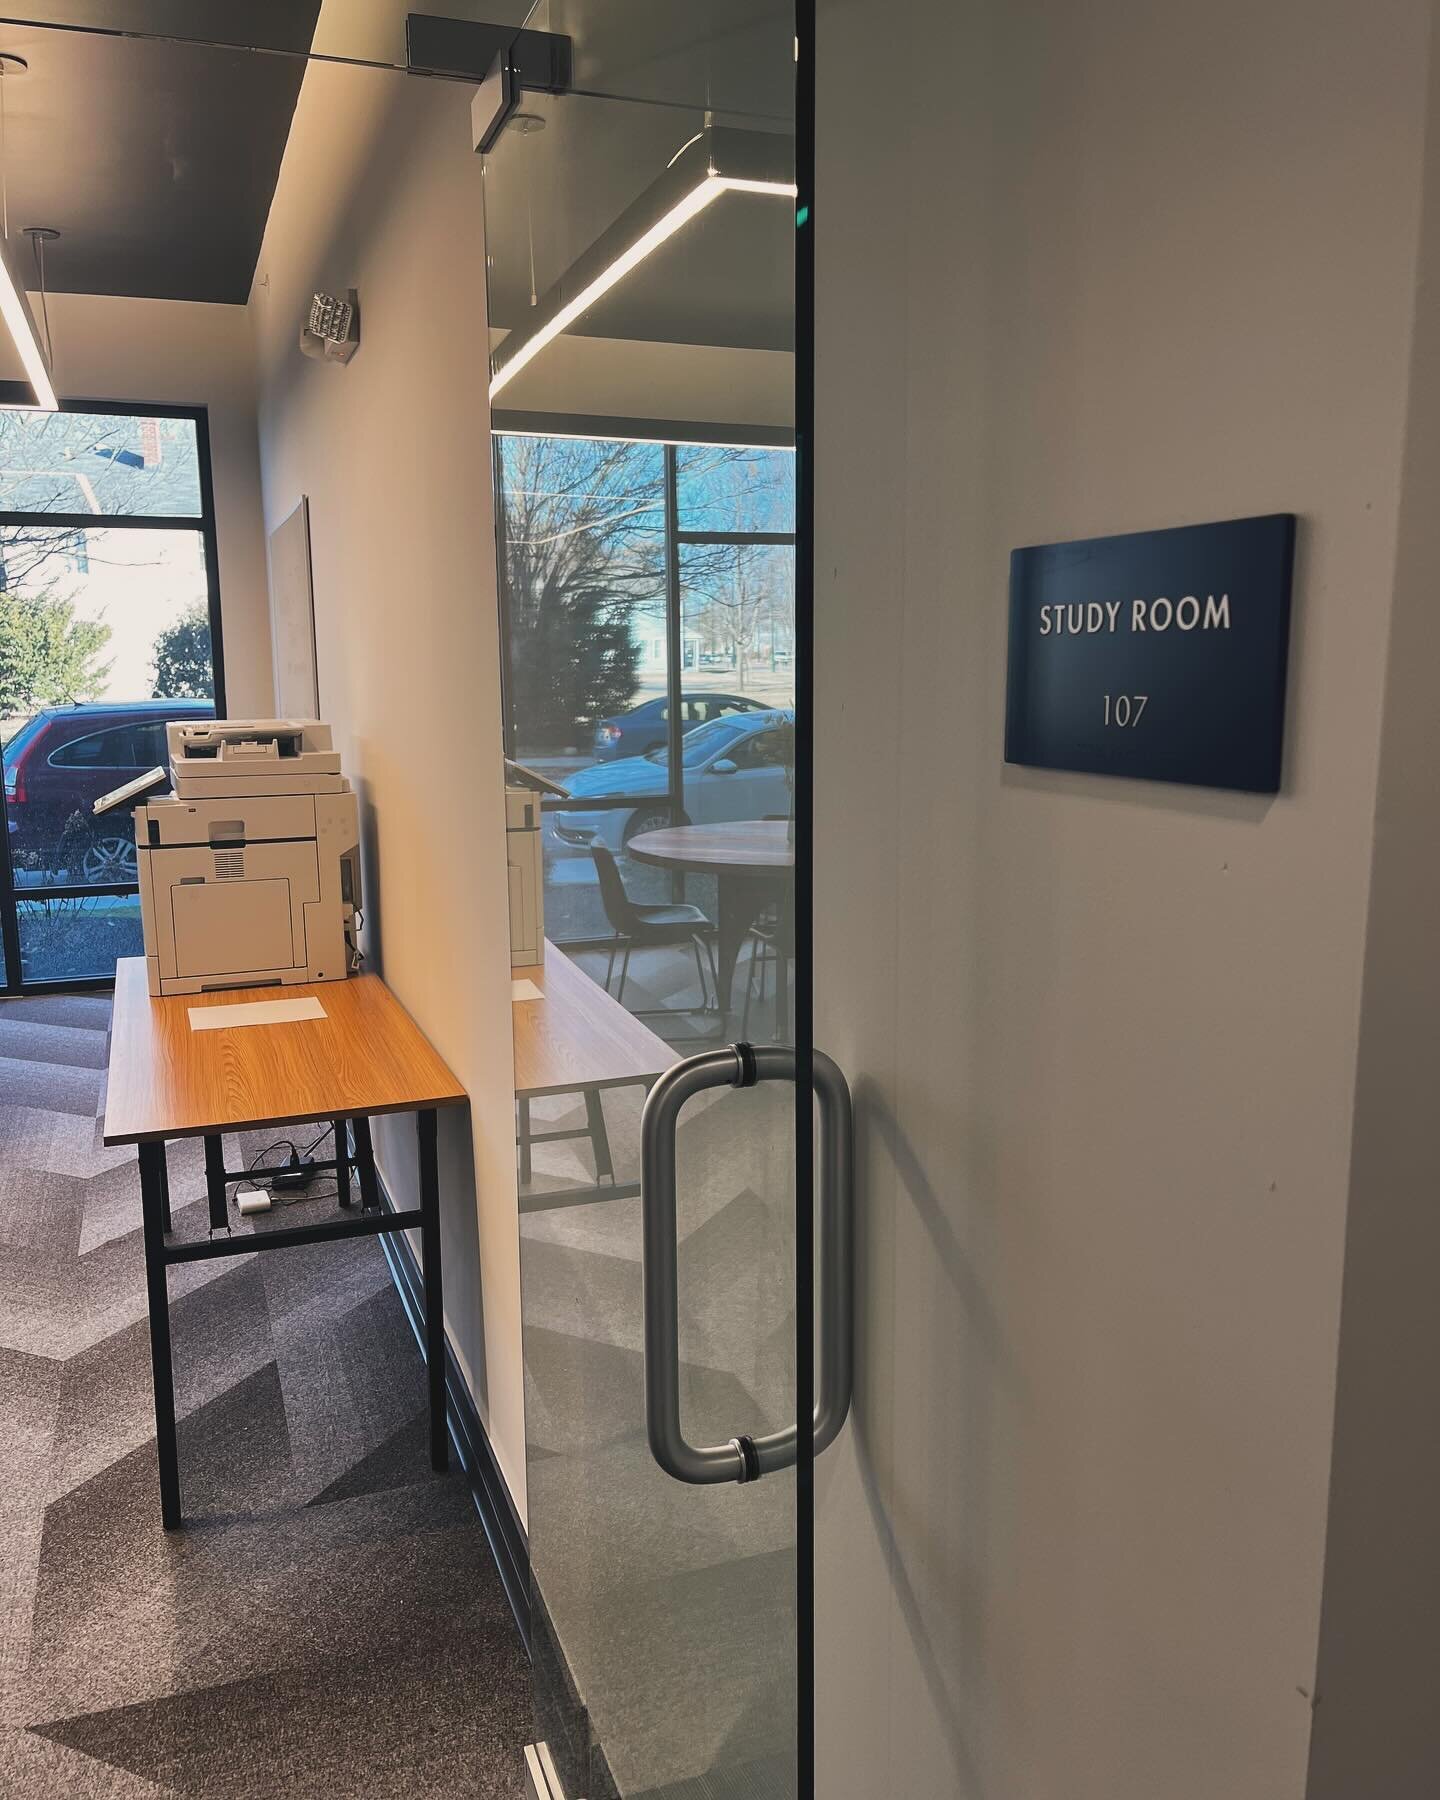 Flight Highlight!!!! Flight Highlight!!!
&nbsp;
If you havent seen it already, our new📚 Study Room on the ground floor is equipped with a printer for our residents! This quiet area is ready for anyone at The Flight to get their work done while livin